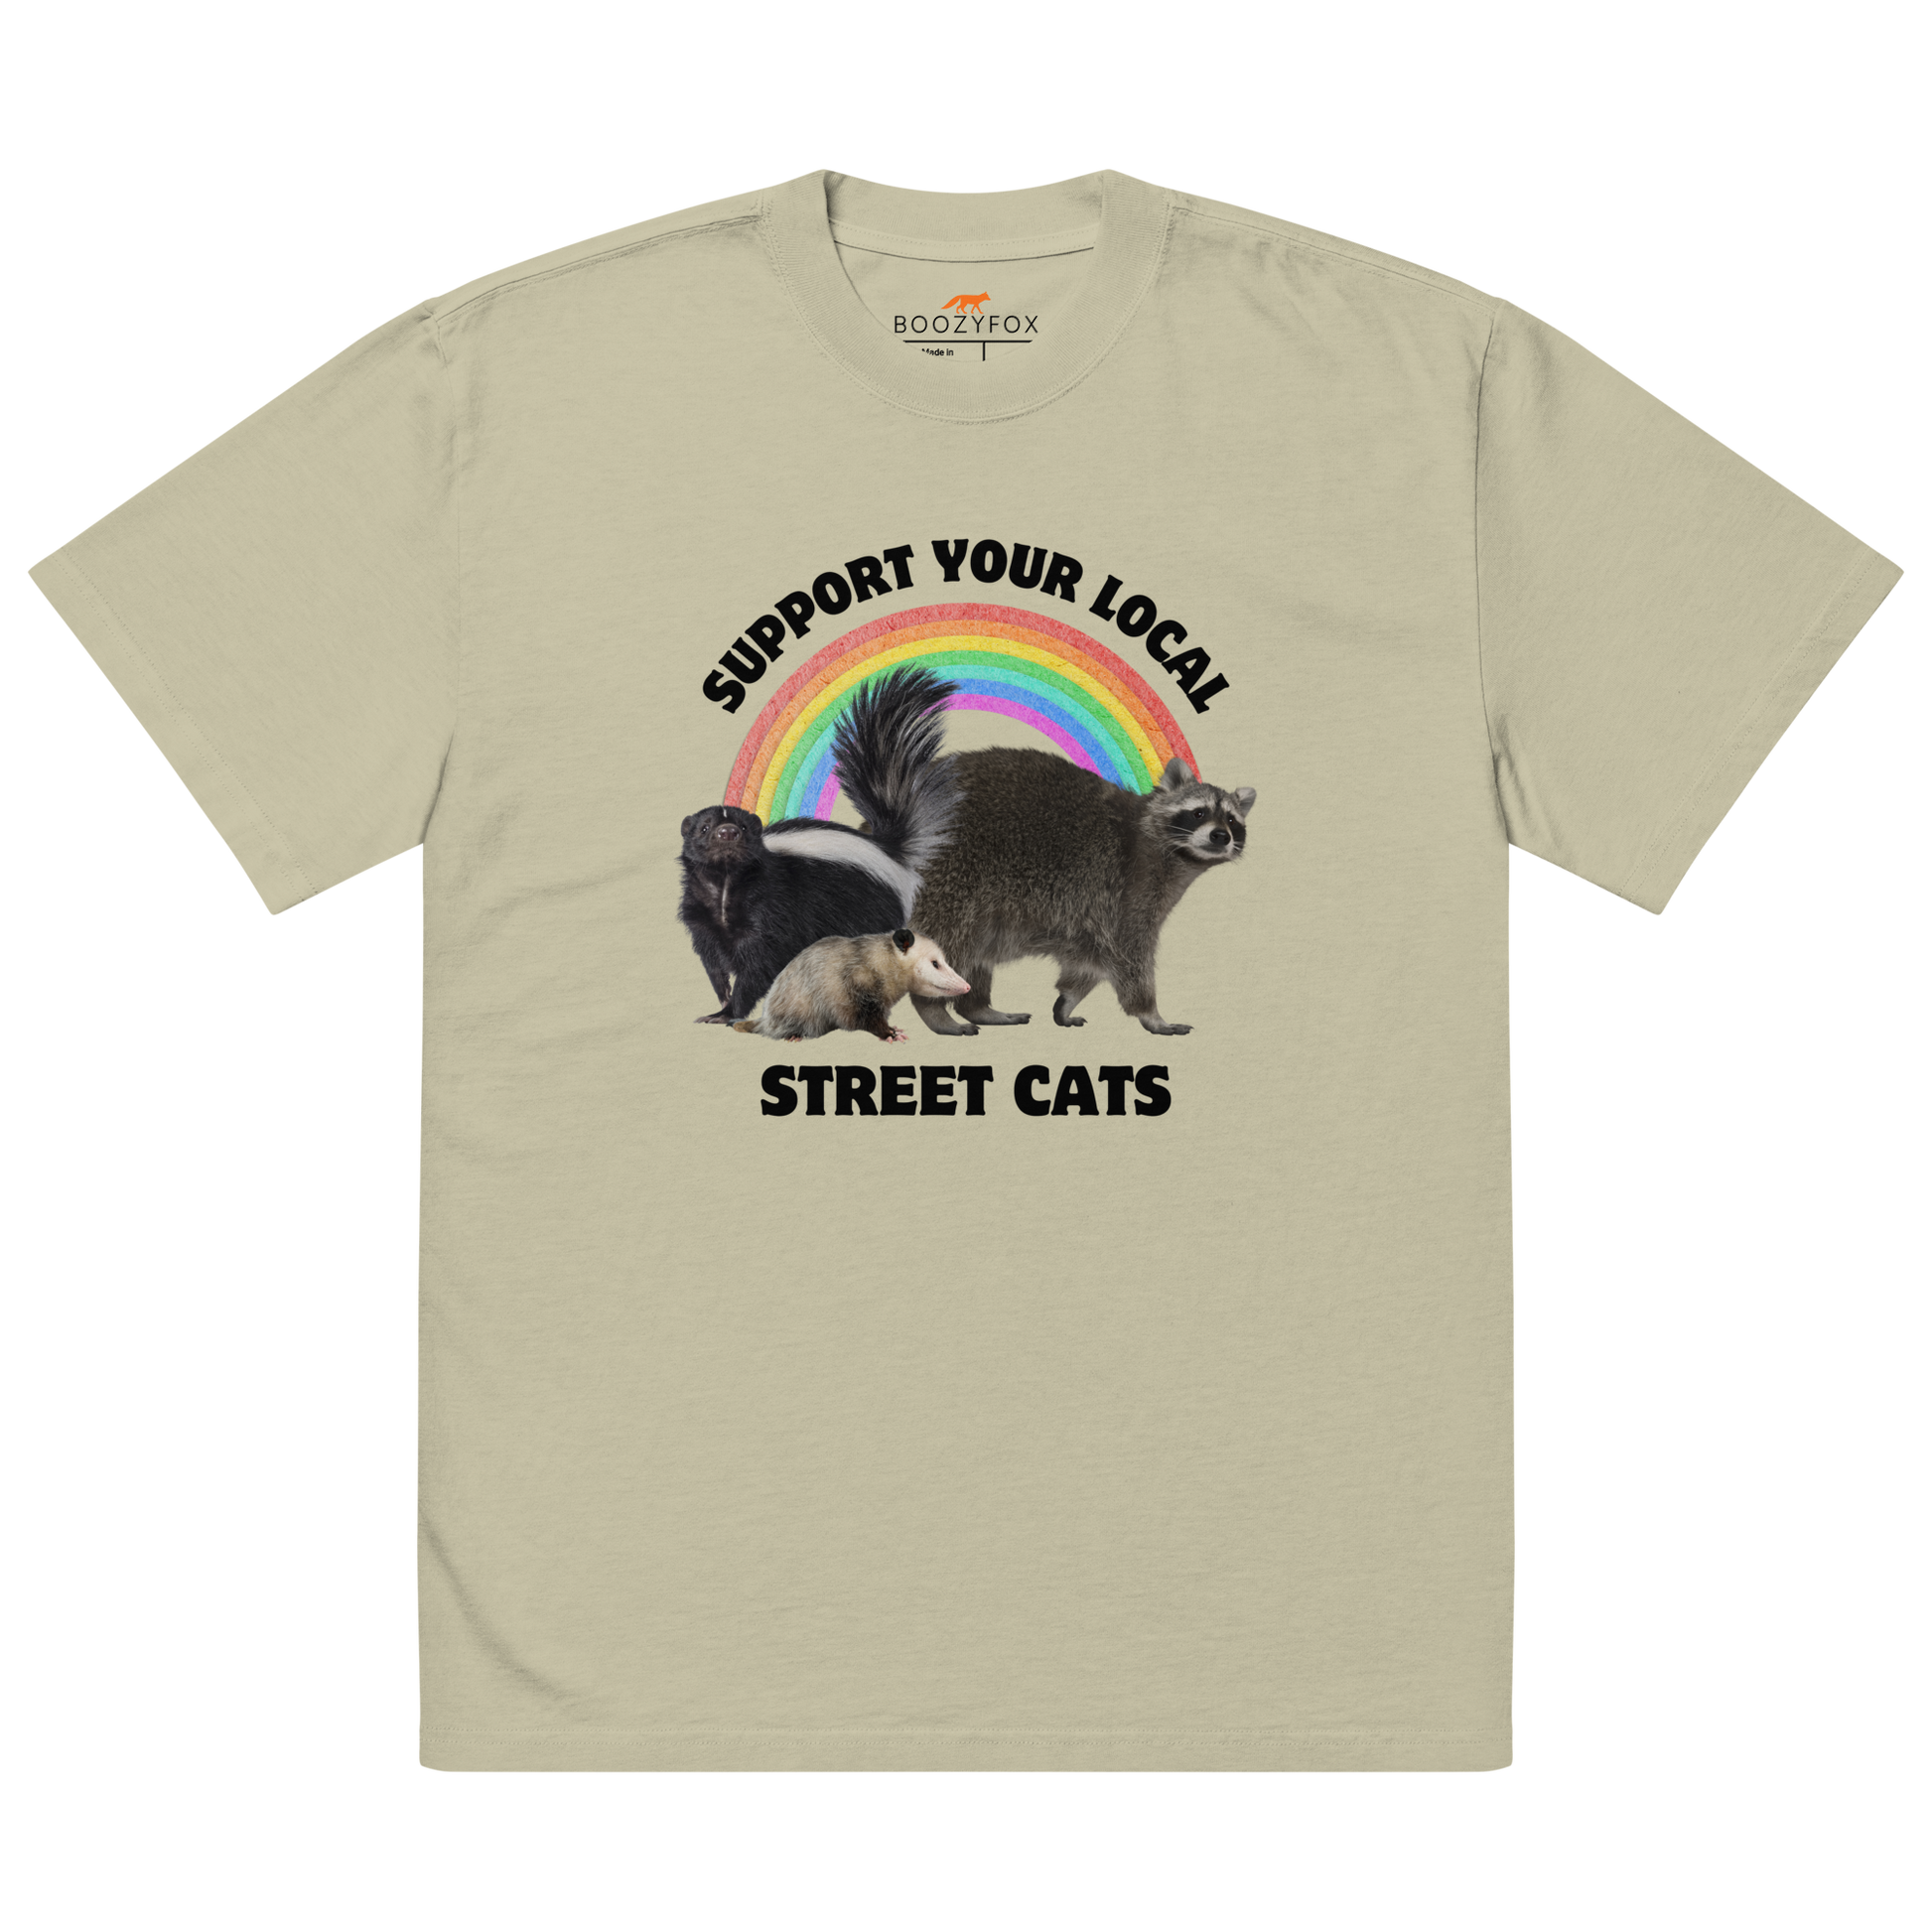 Faded Eucalyptus Street Cats Oversized T-Shirt featuring a purr-fect trio – opossum, skunk, raccoon – and the Support Your Local Street Cats graphic on the chest - Funny Graphic Animal Oversized Tees - Boozy Fox